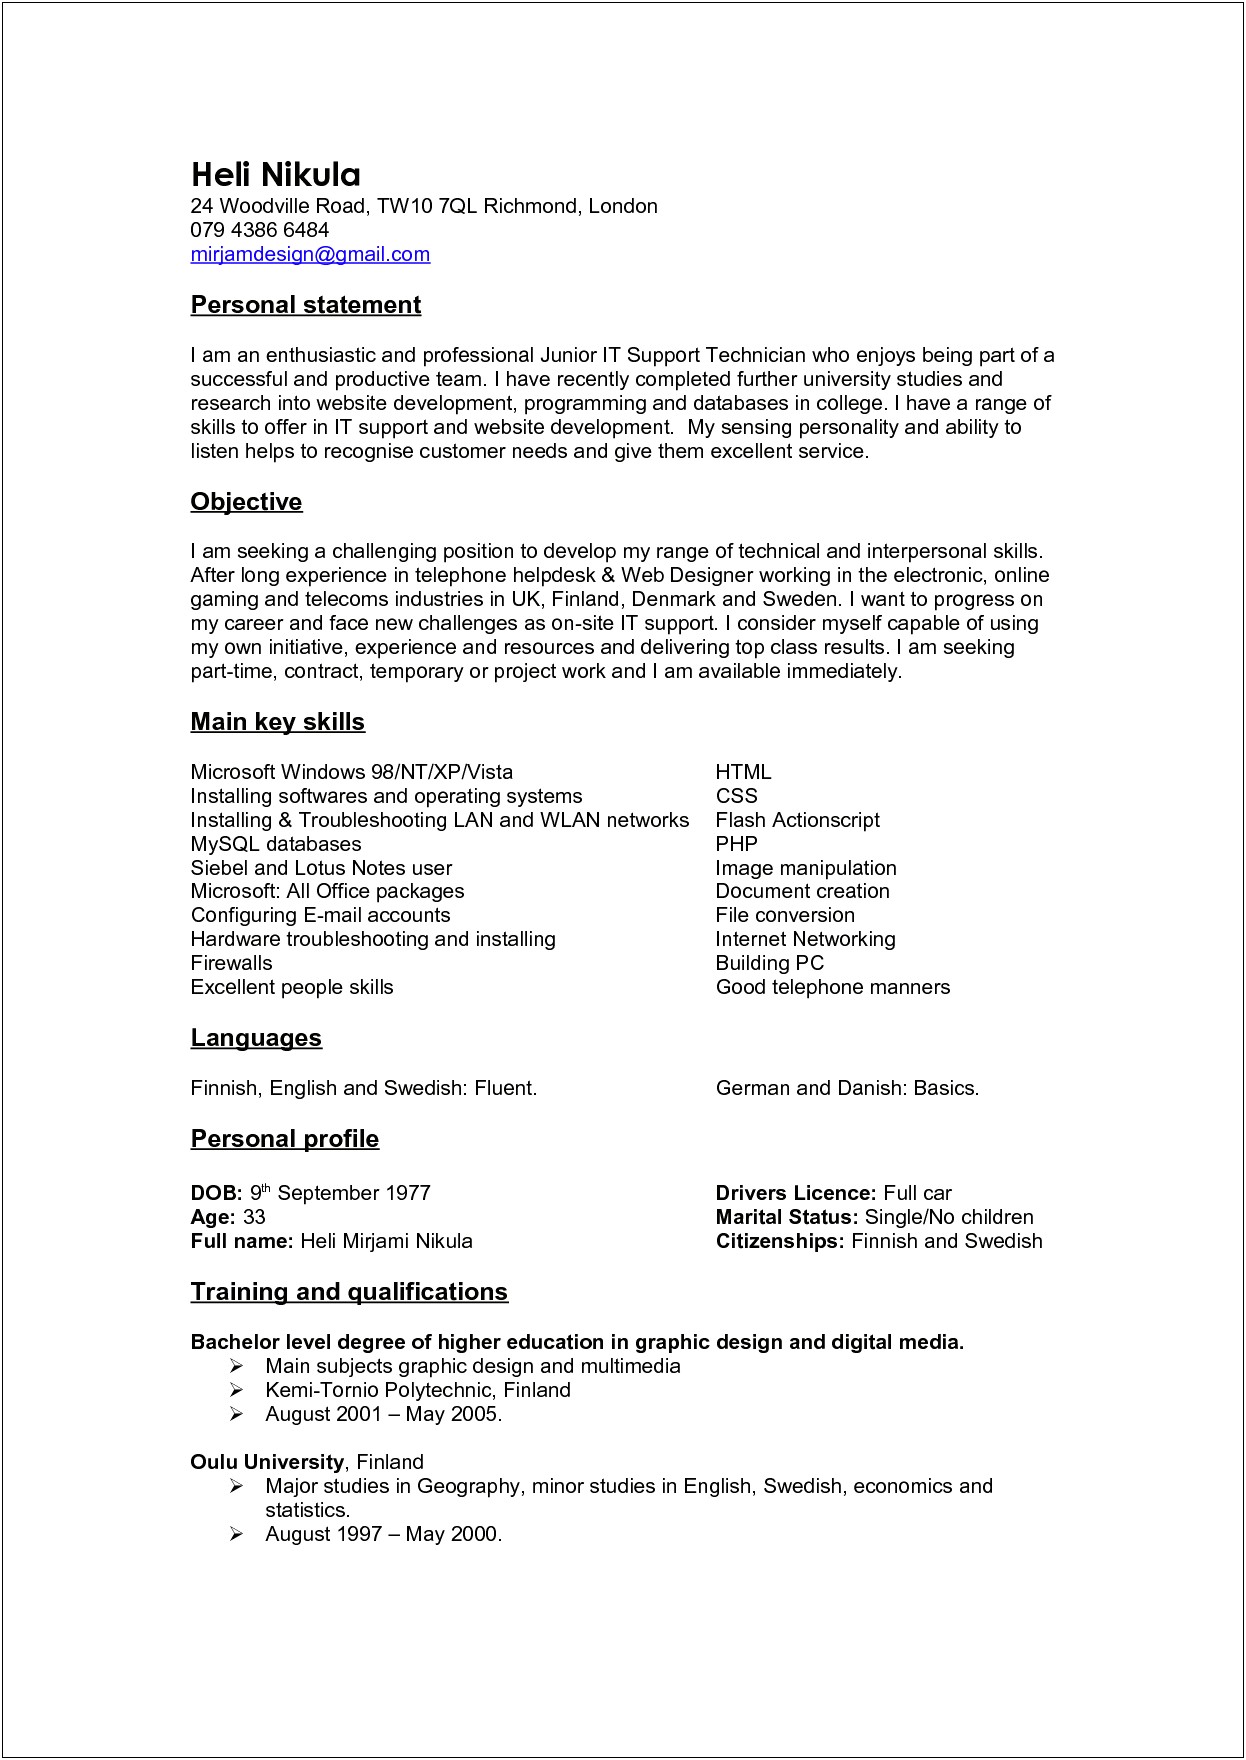 Personal Statement In Resume Sample